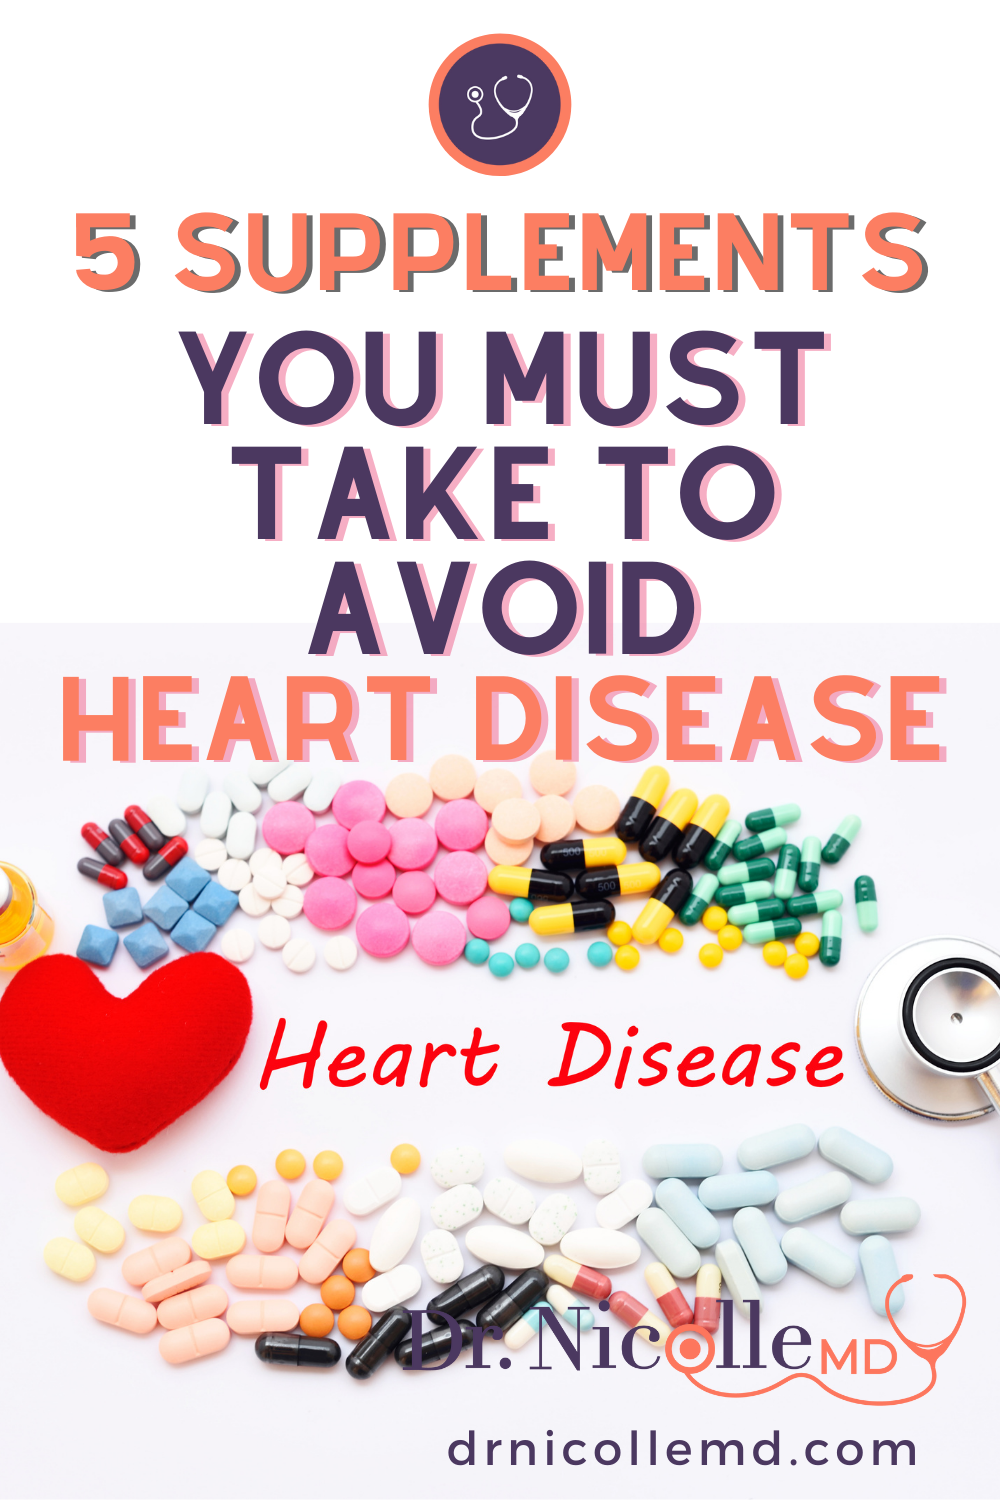 5 Supplements You MUST Take to Avoid Heart Disease